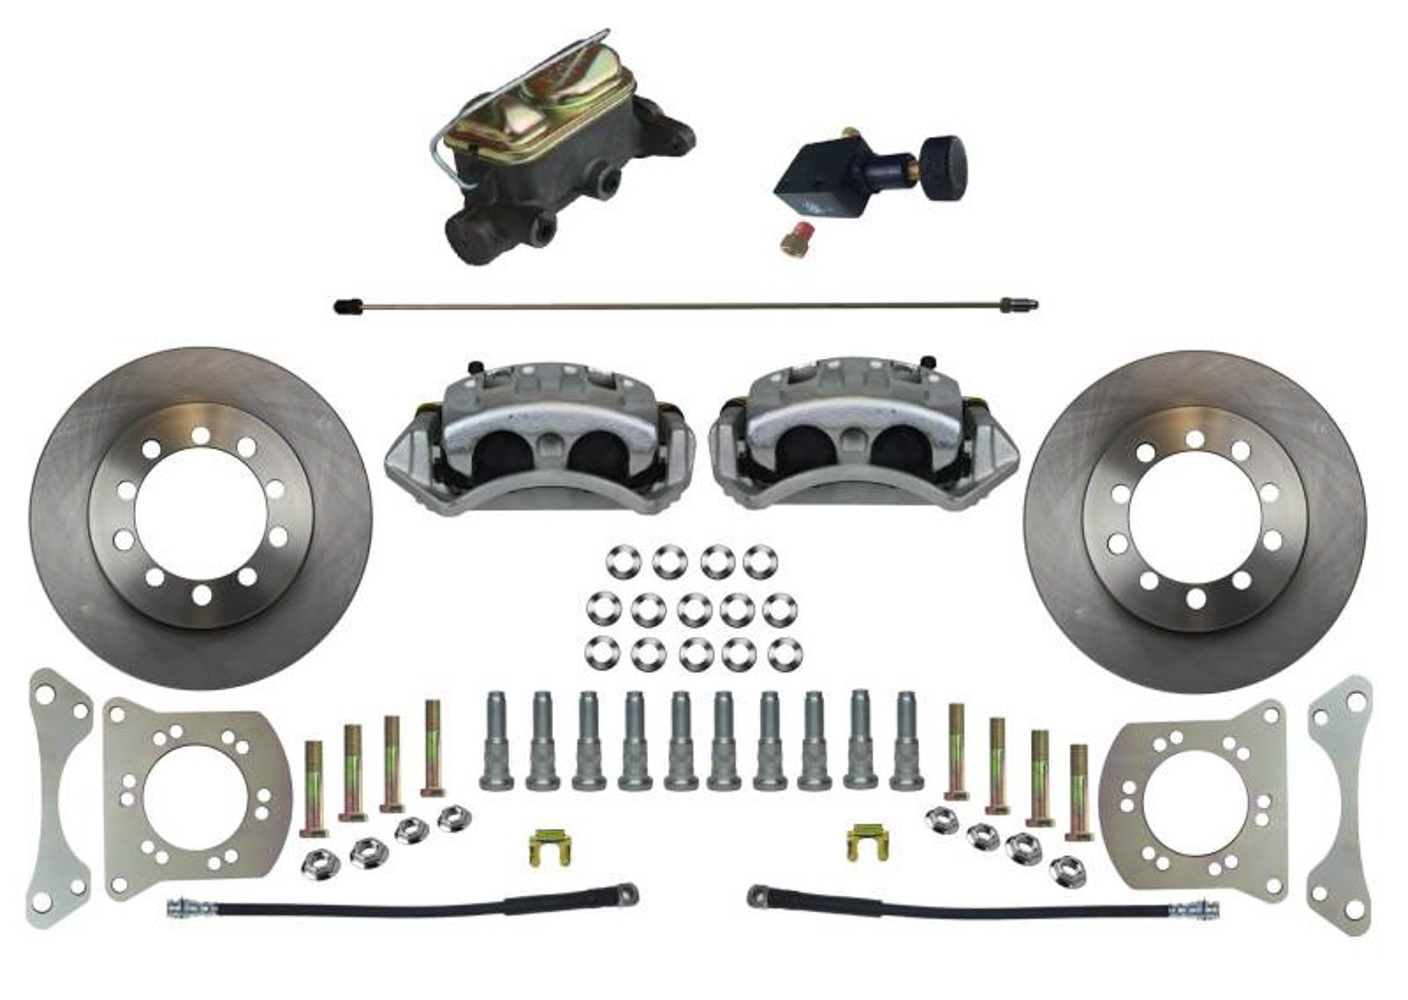 Leed Brakes FC5001-405 Brake System, Disc Conversion, Front, 2 Piston Caliper, 12 in Solid Rotors, Master Cylinder, Iron, Zinc Plated, Ford Fullsize SUV 1966-75, Kit